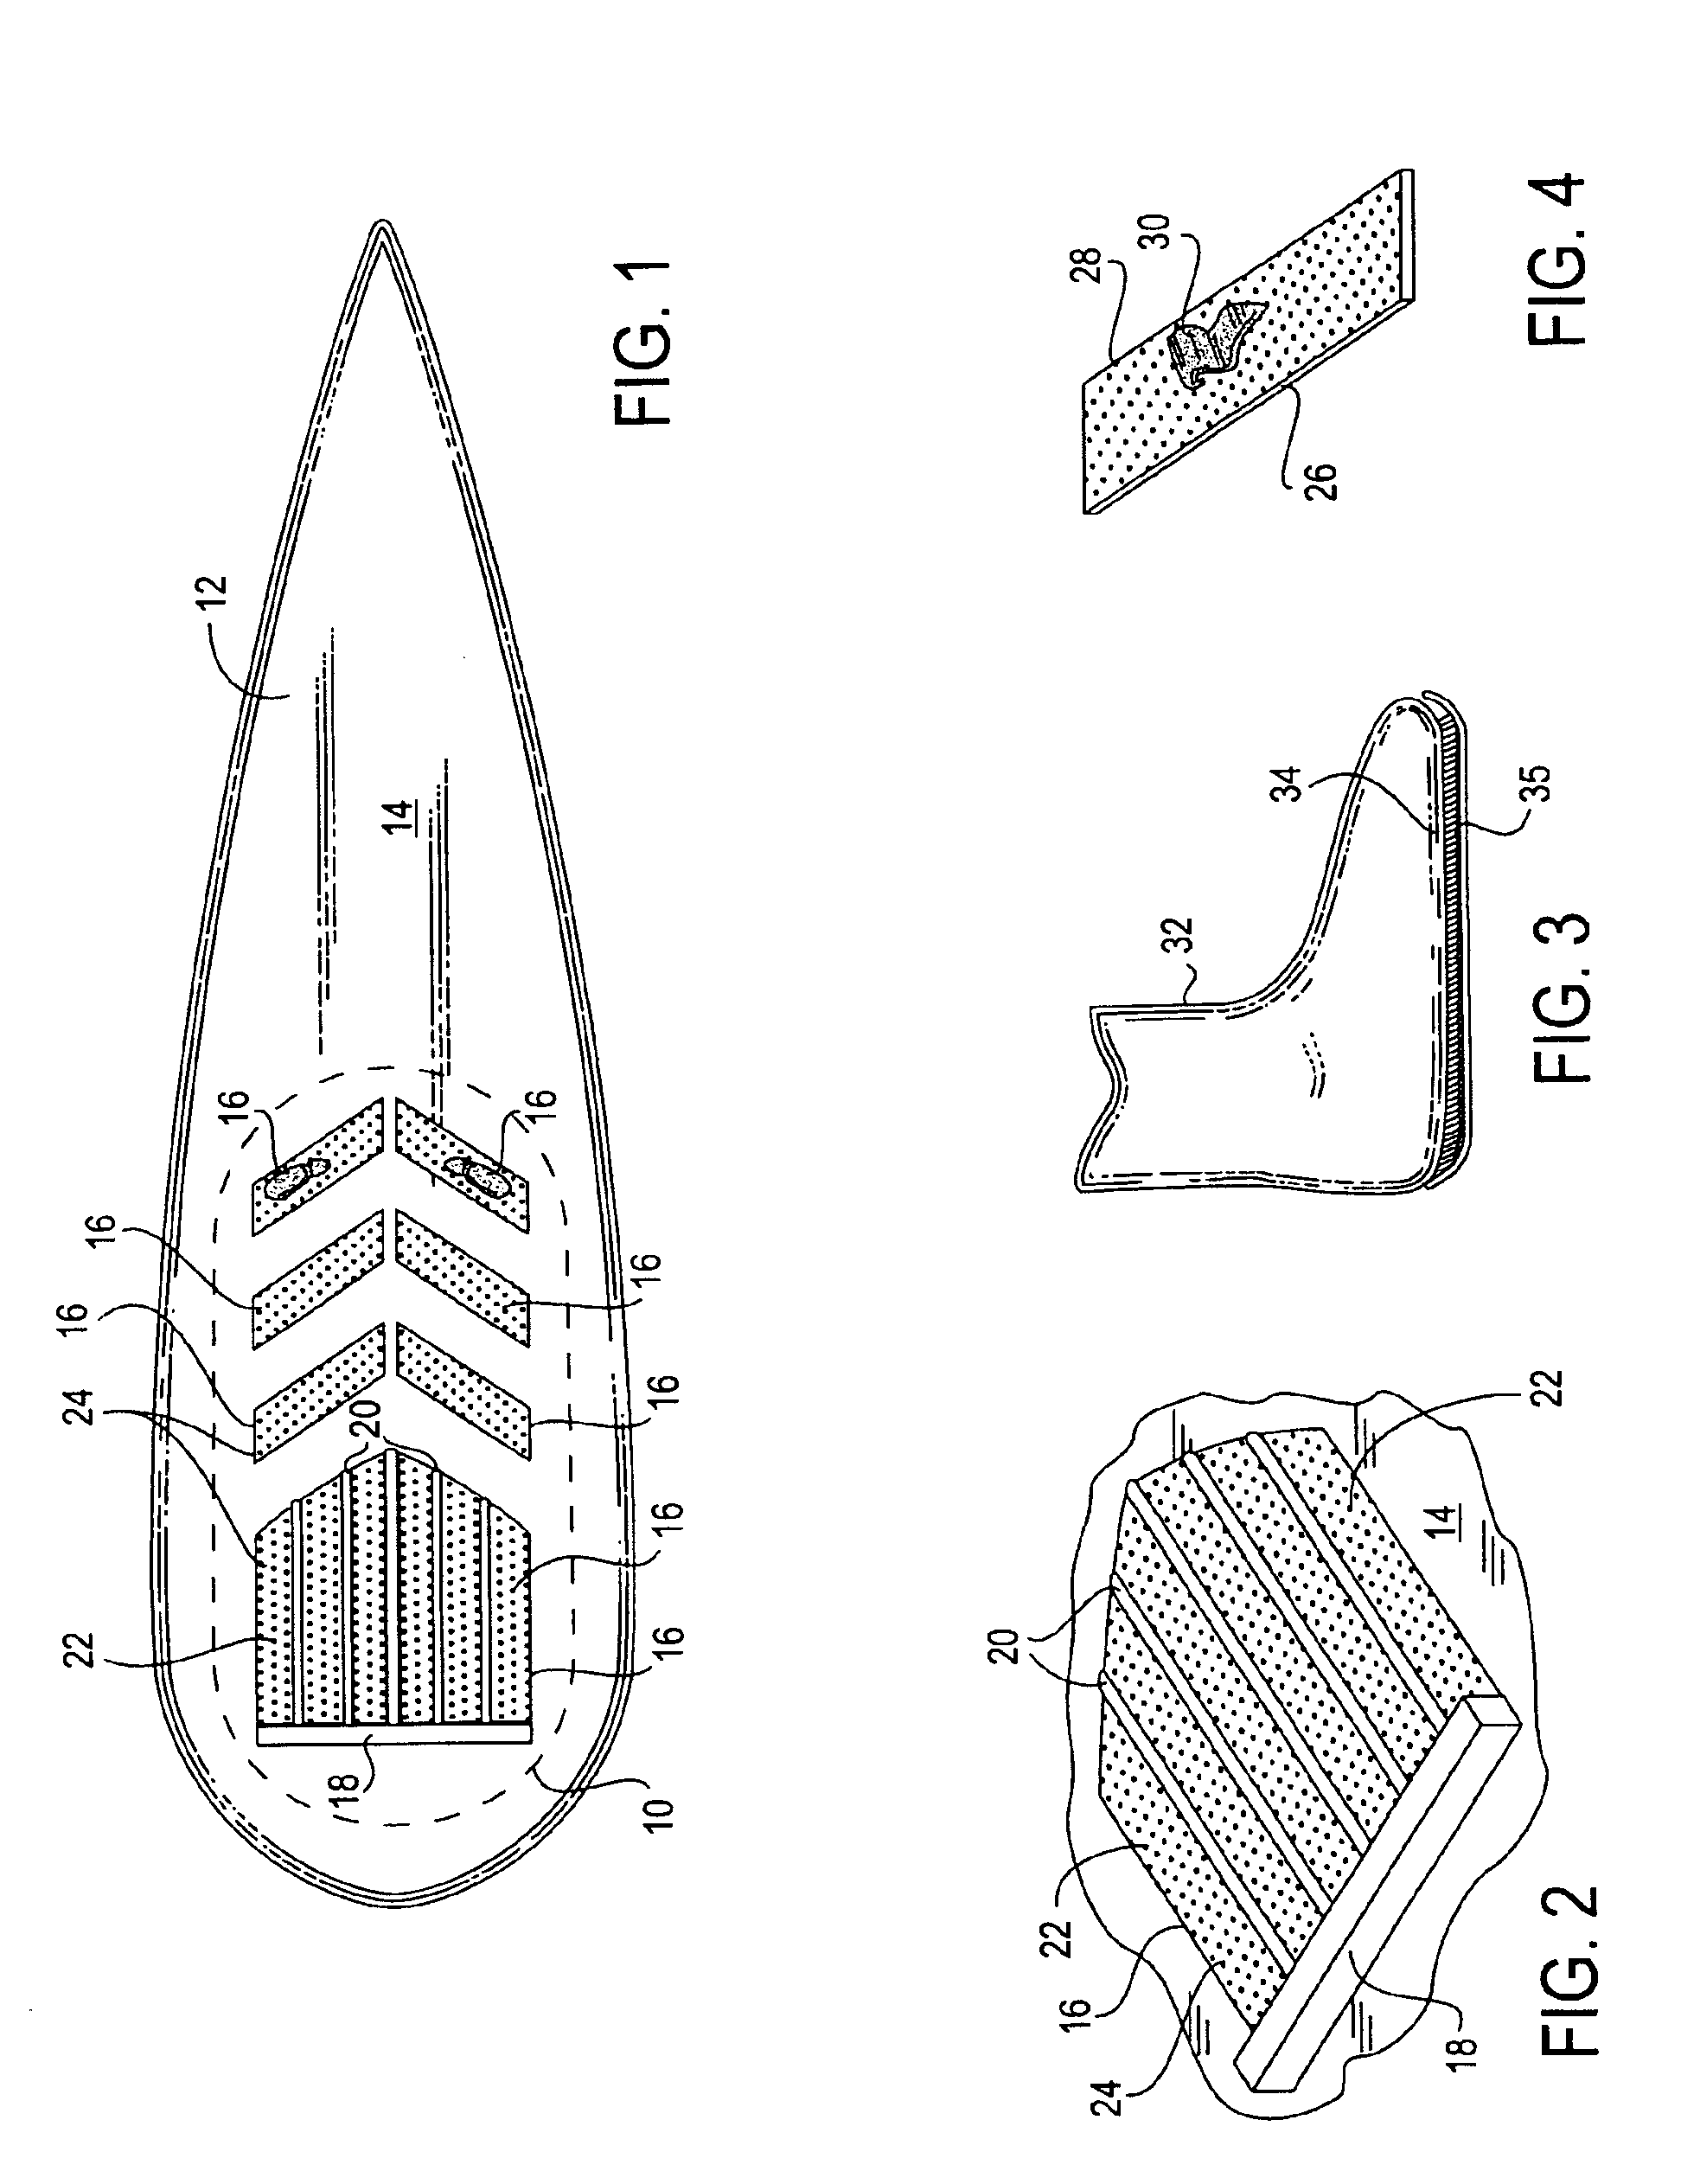 Sport board control device and footpiece